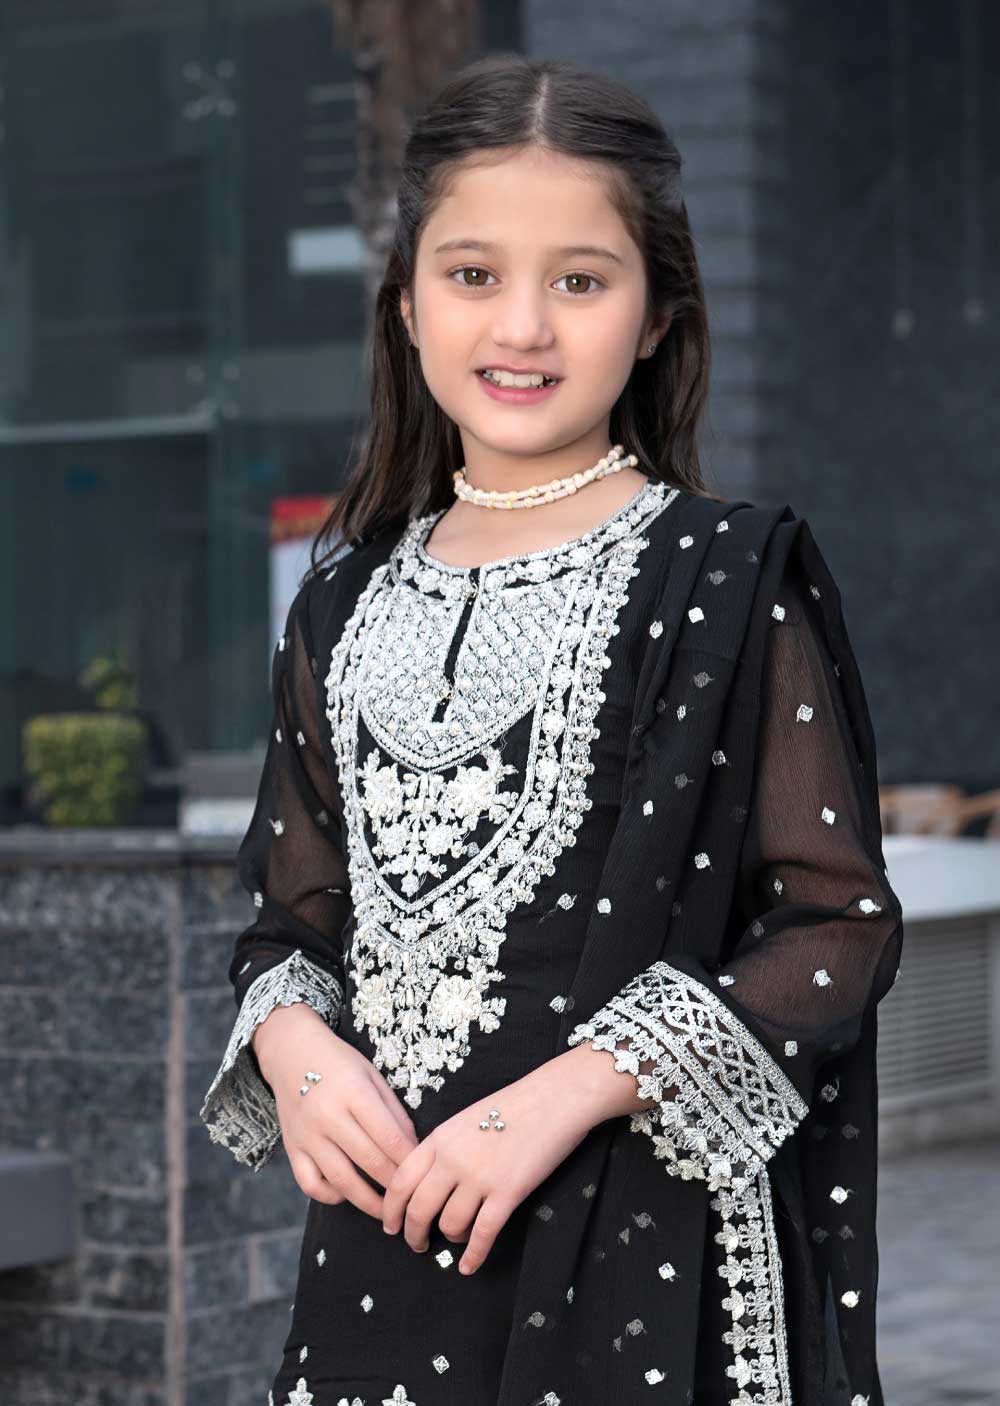 AR-3837 - Readymade - Kids Formal Collection by Ally's 2024 - Memsaab Online